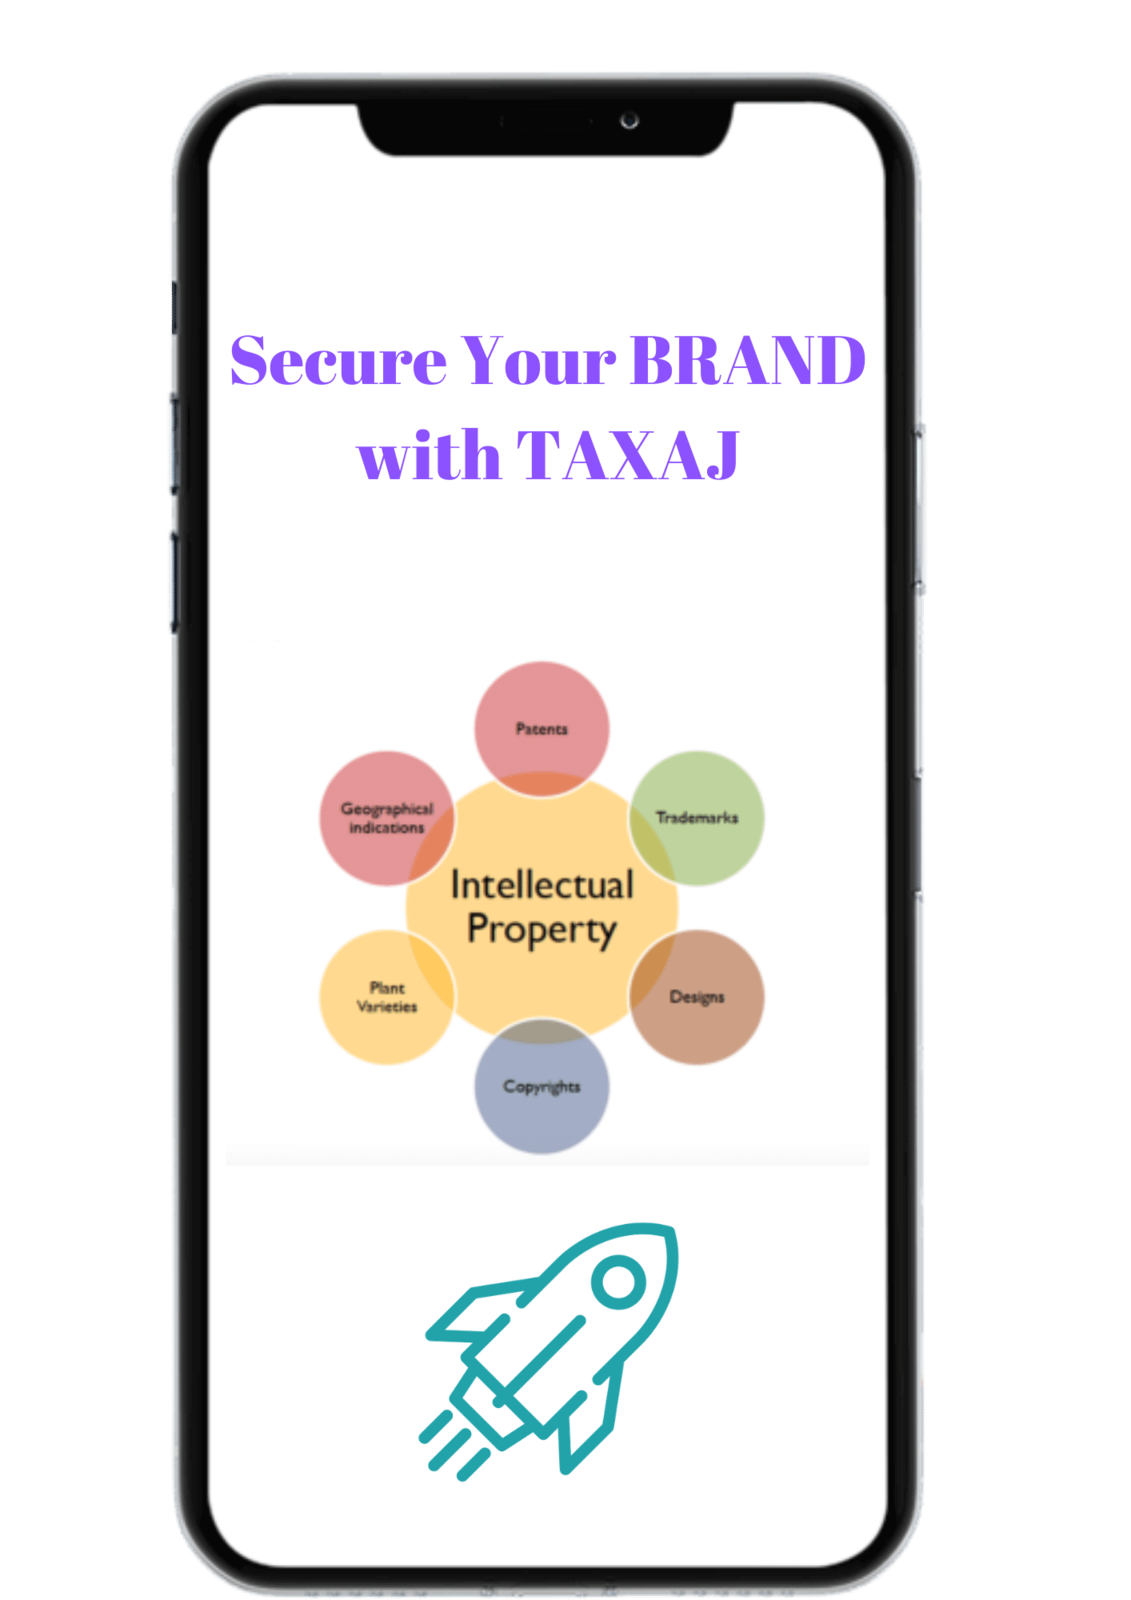 Secure your brand with taxaj